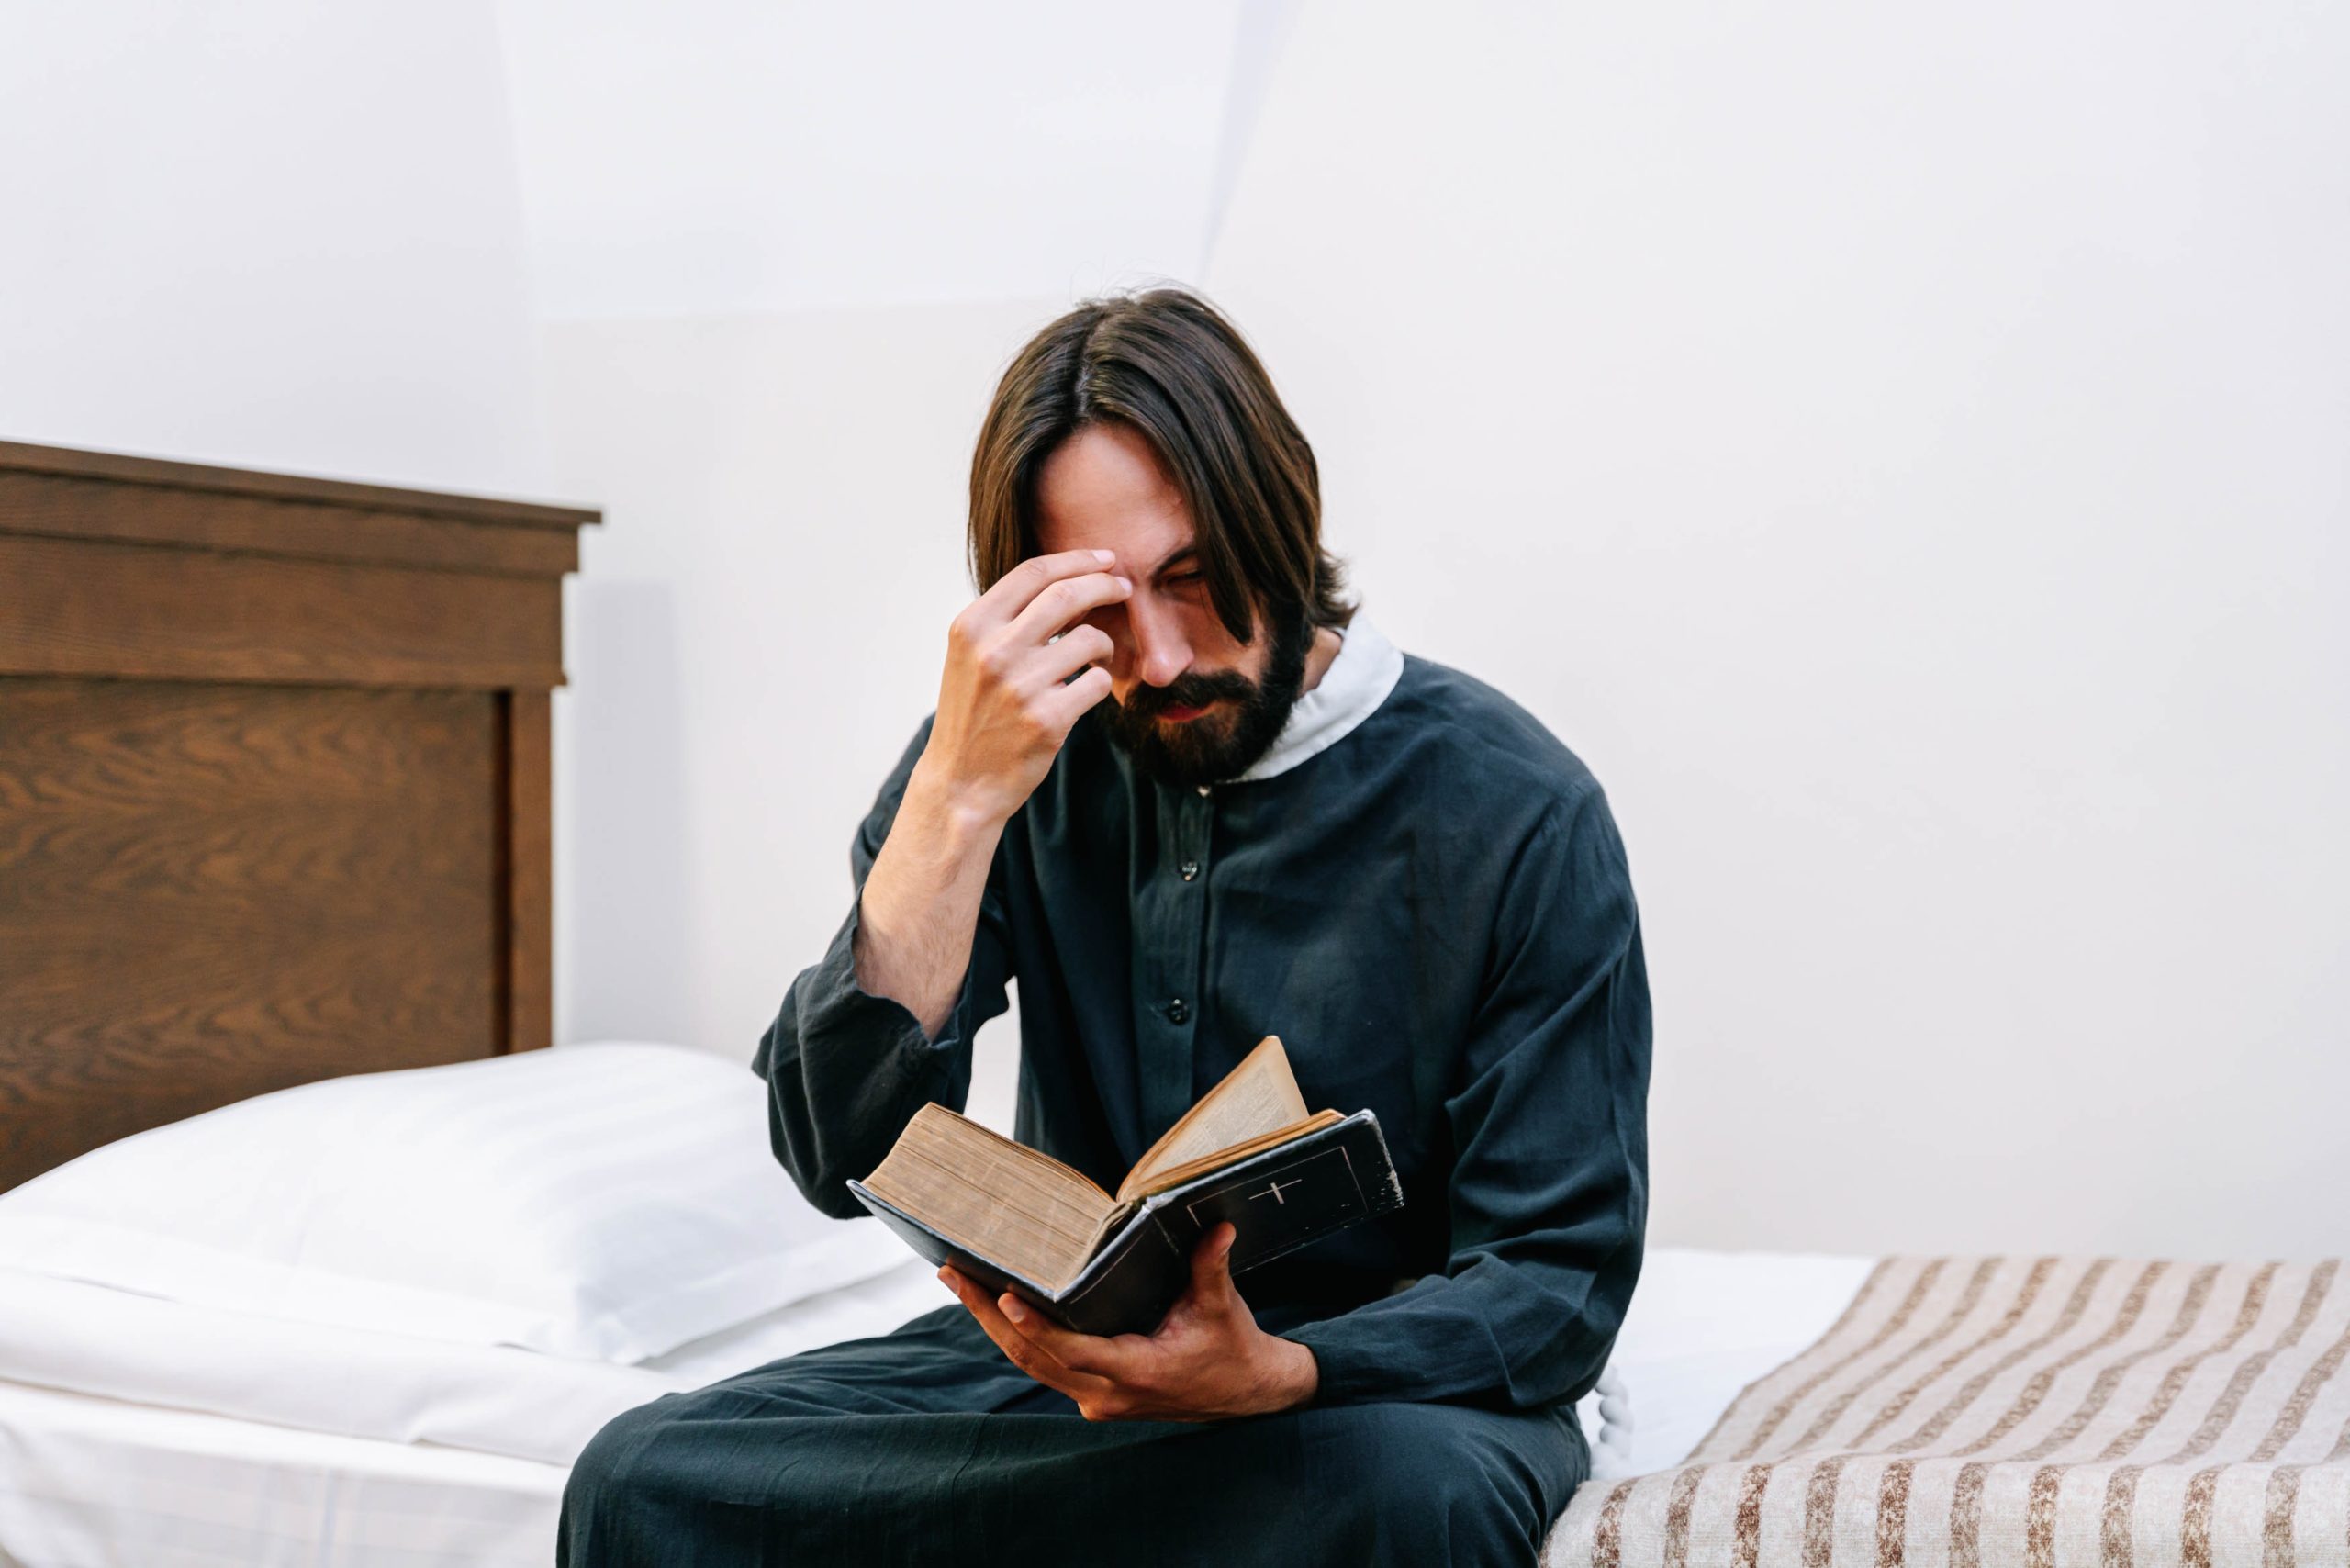 A man is sitting on a bed. He is reading a Bible and has his hand on his forehead.